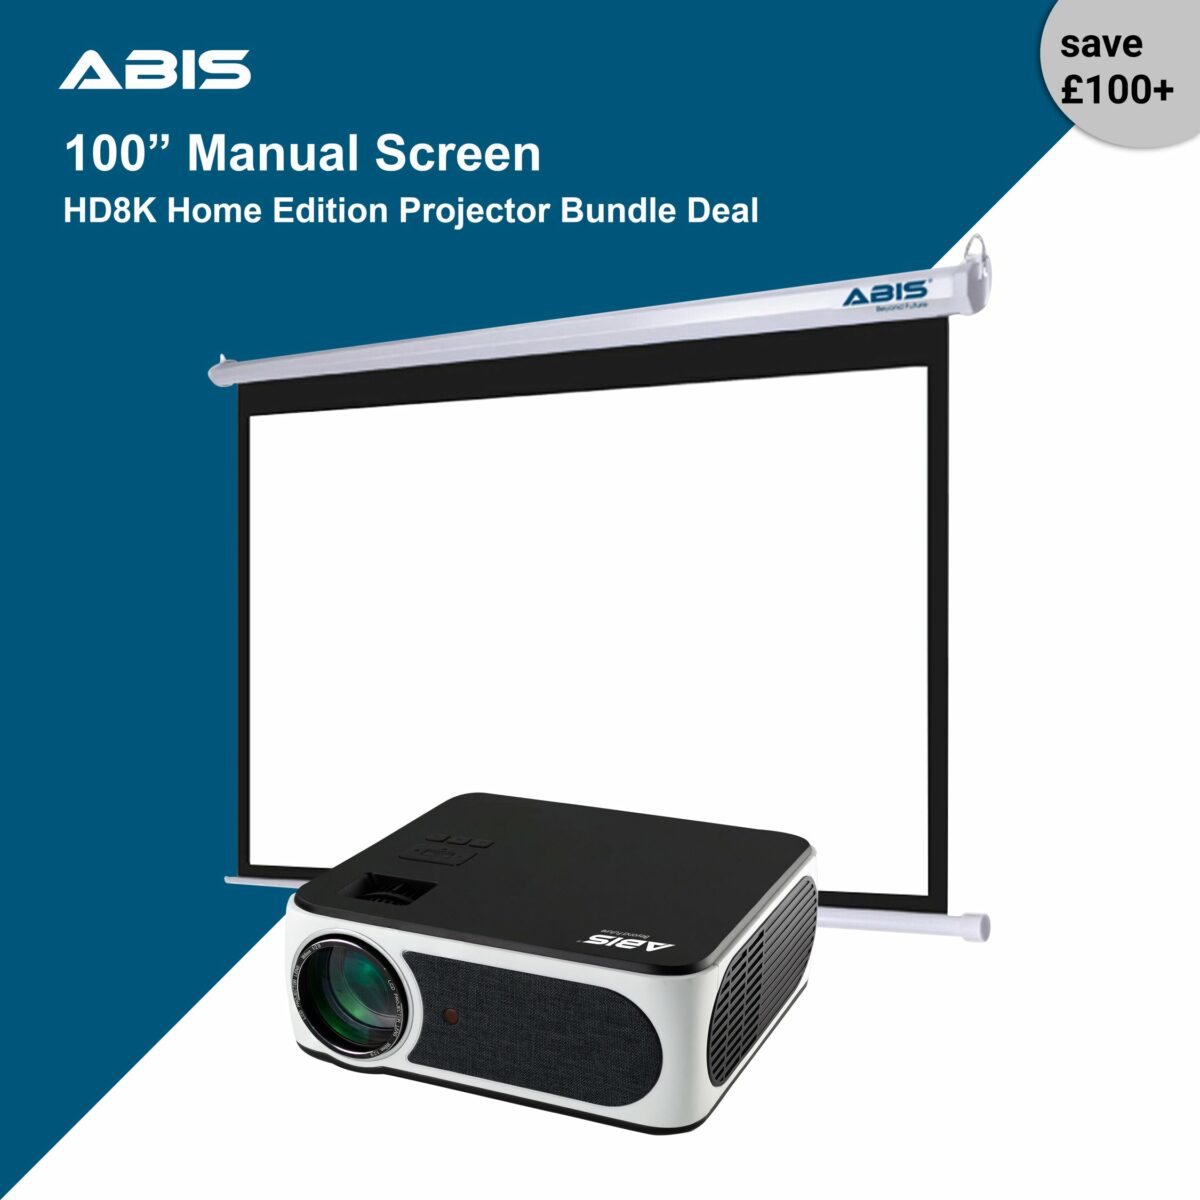 100" Manual Projector Screen & Projector Bundle with Android TV Stick for Home - ABIS